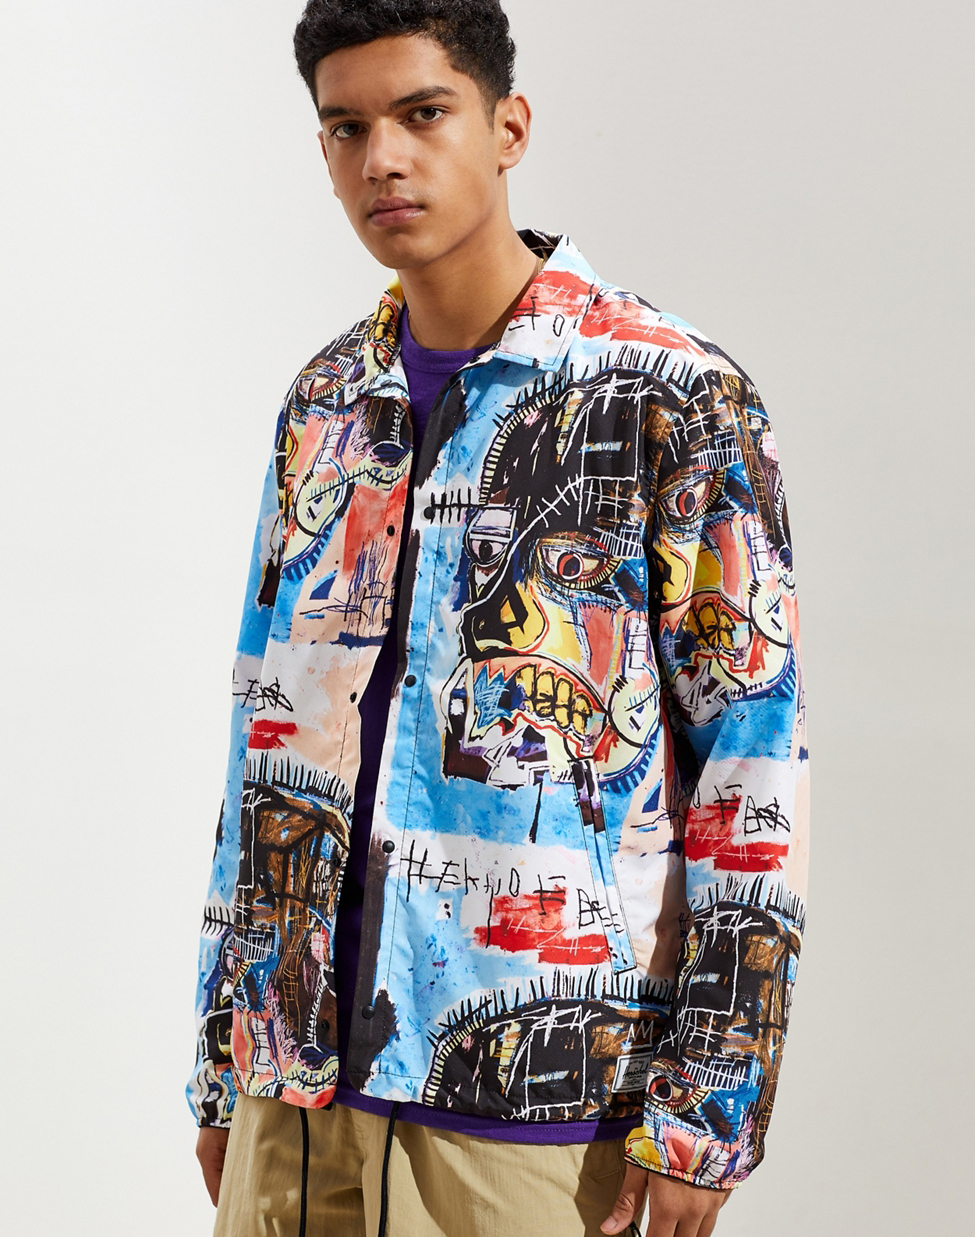 Herschel Supply Co. X Basquiat Voyage Coaches Jacket – be the signs